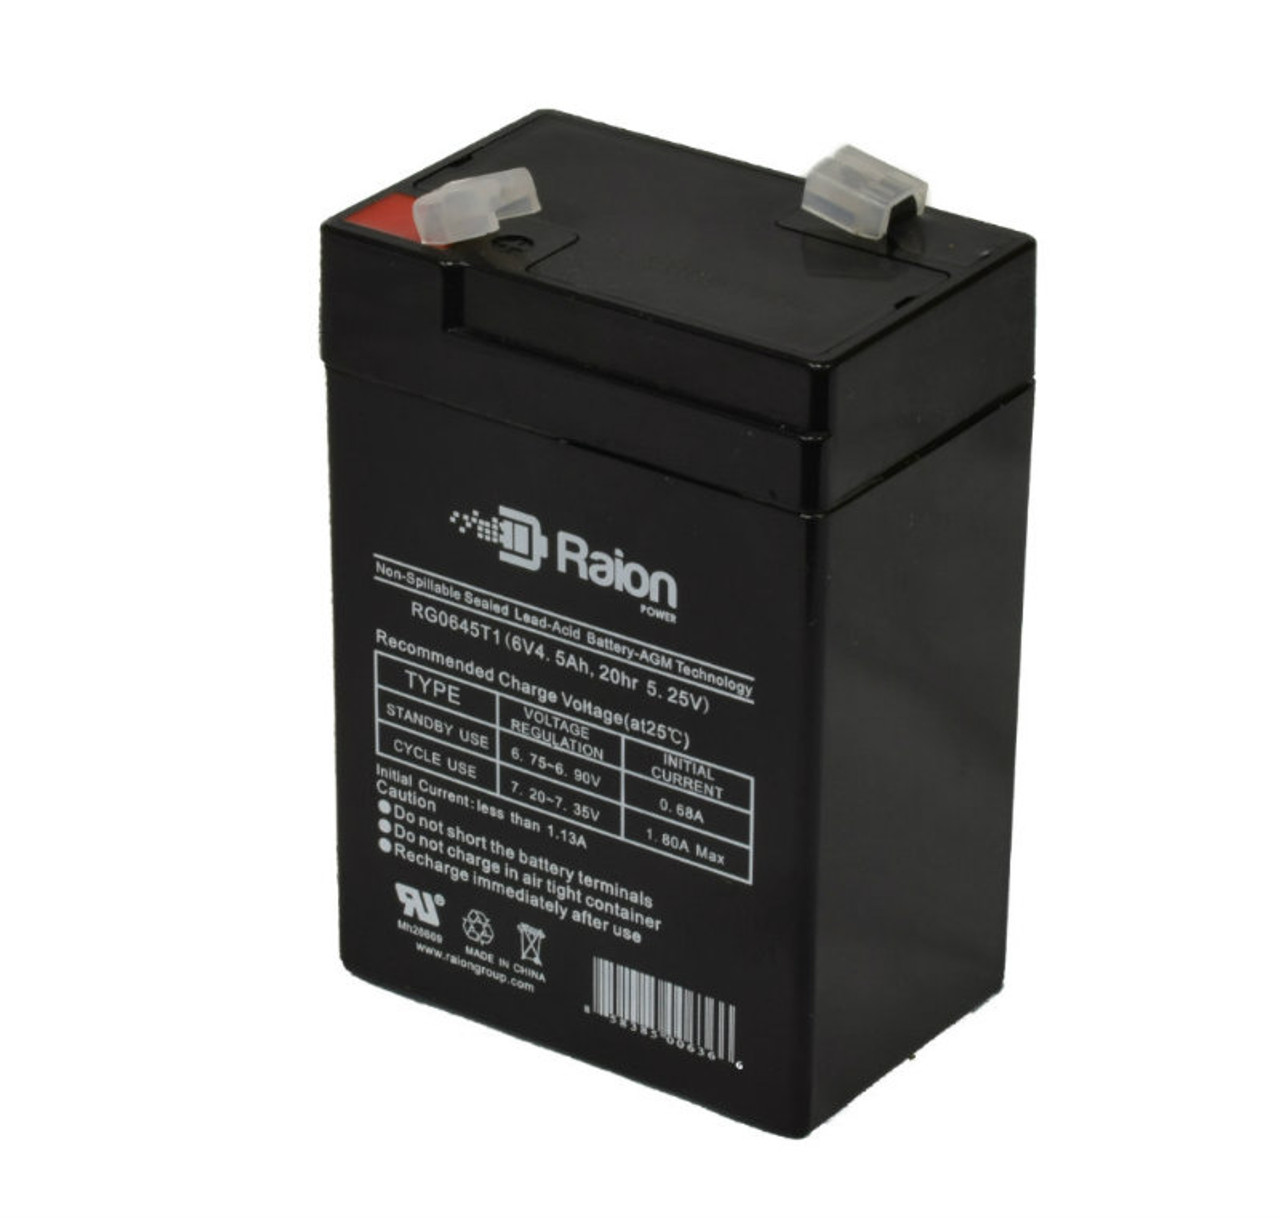 Raion Power RG0645T1 6V 4.5Ah Replacement Battery Cartridge for Lithonia AQM